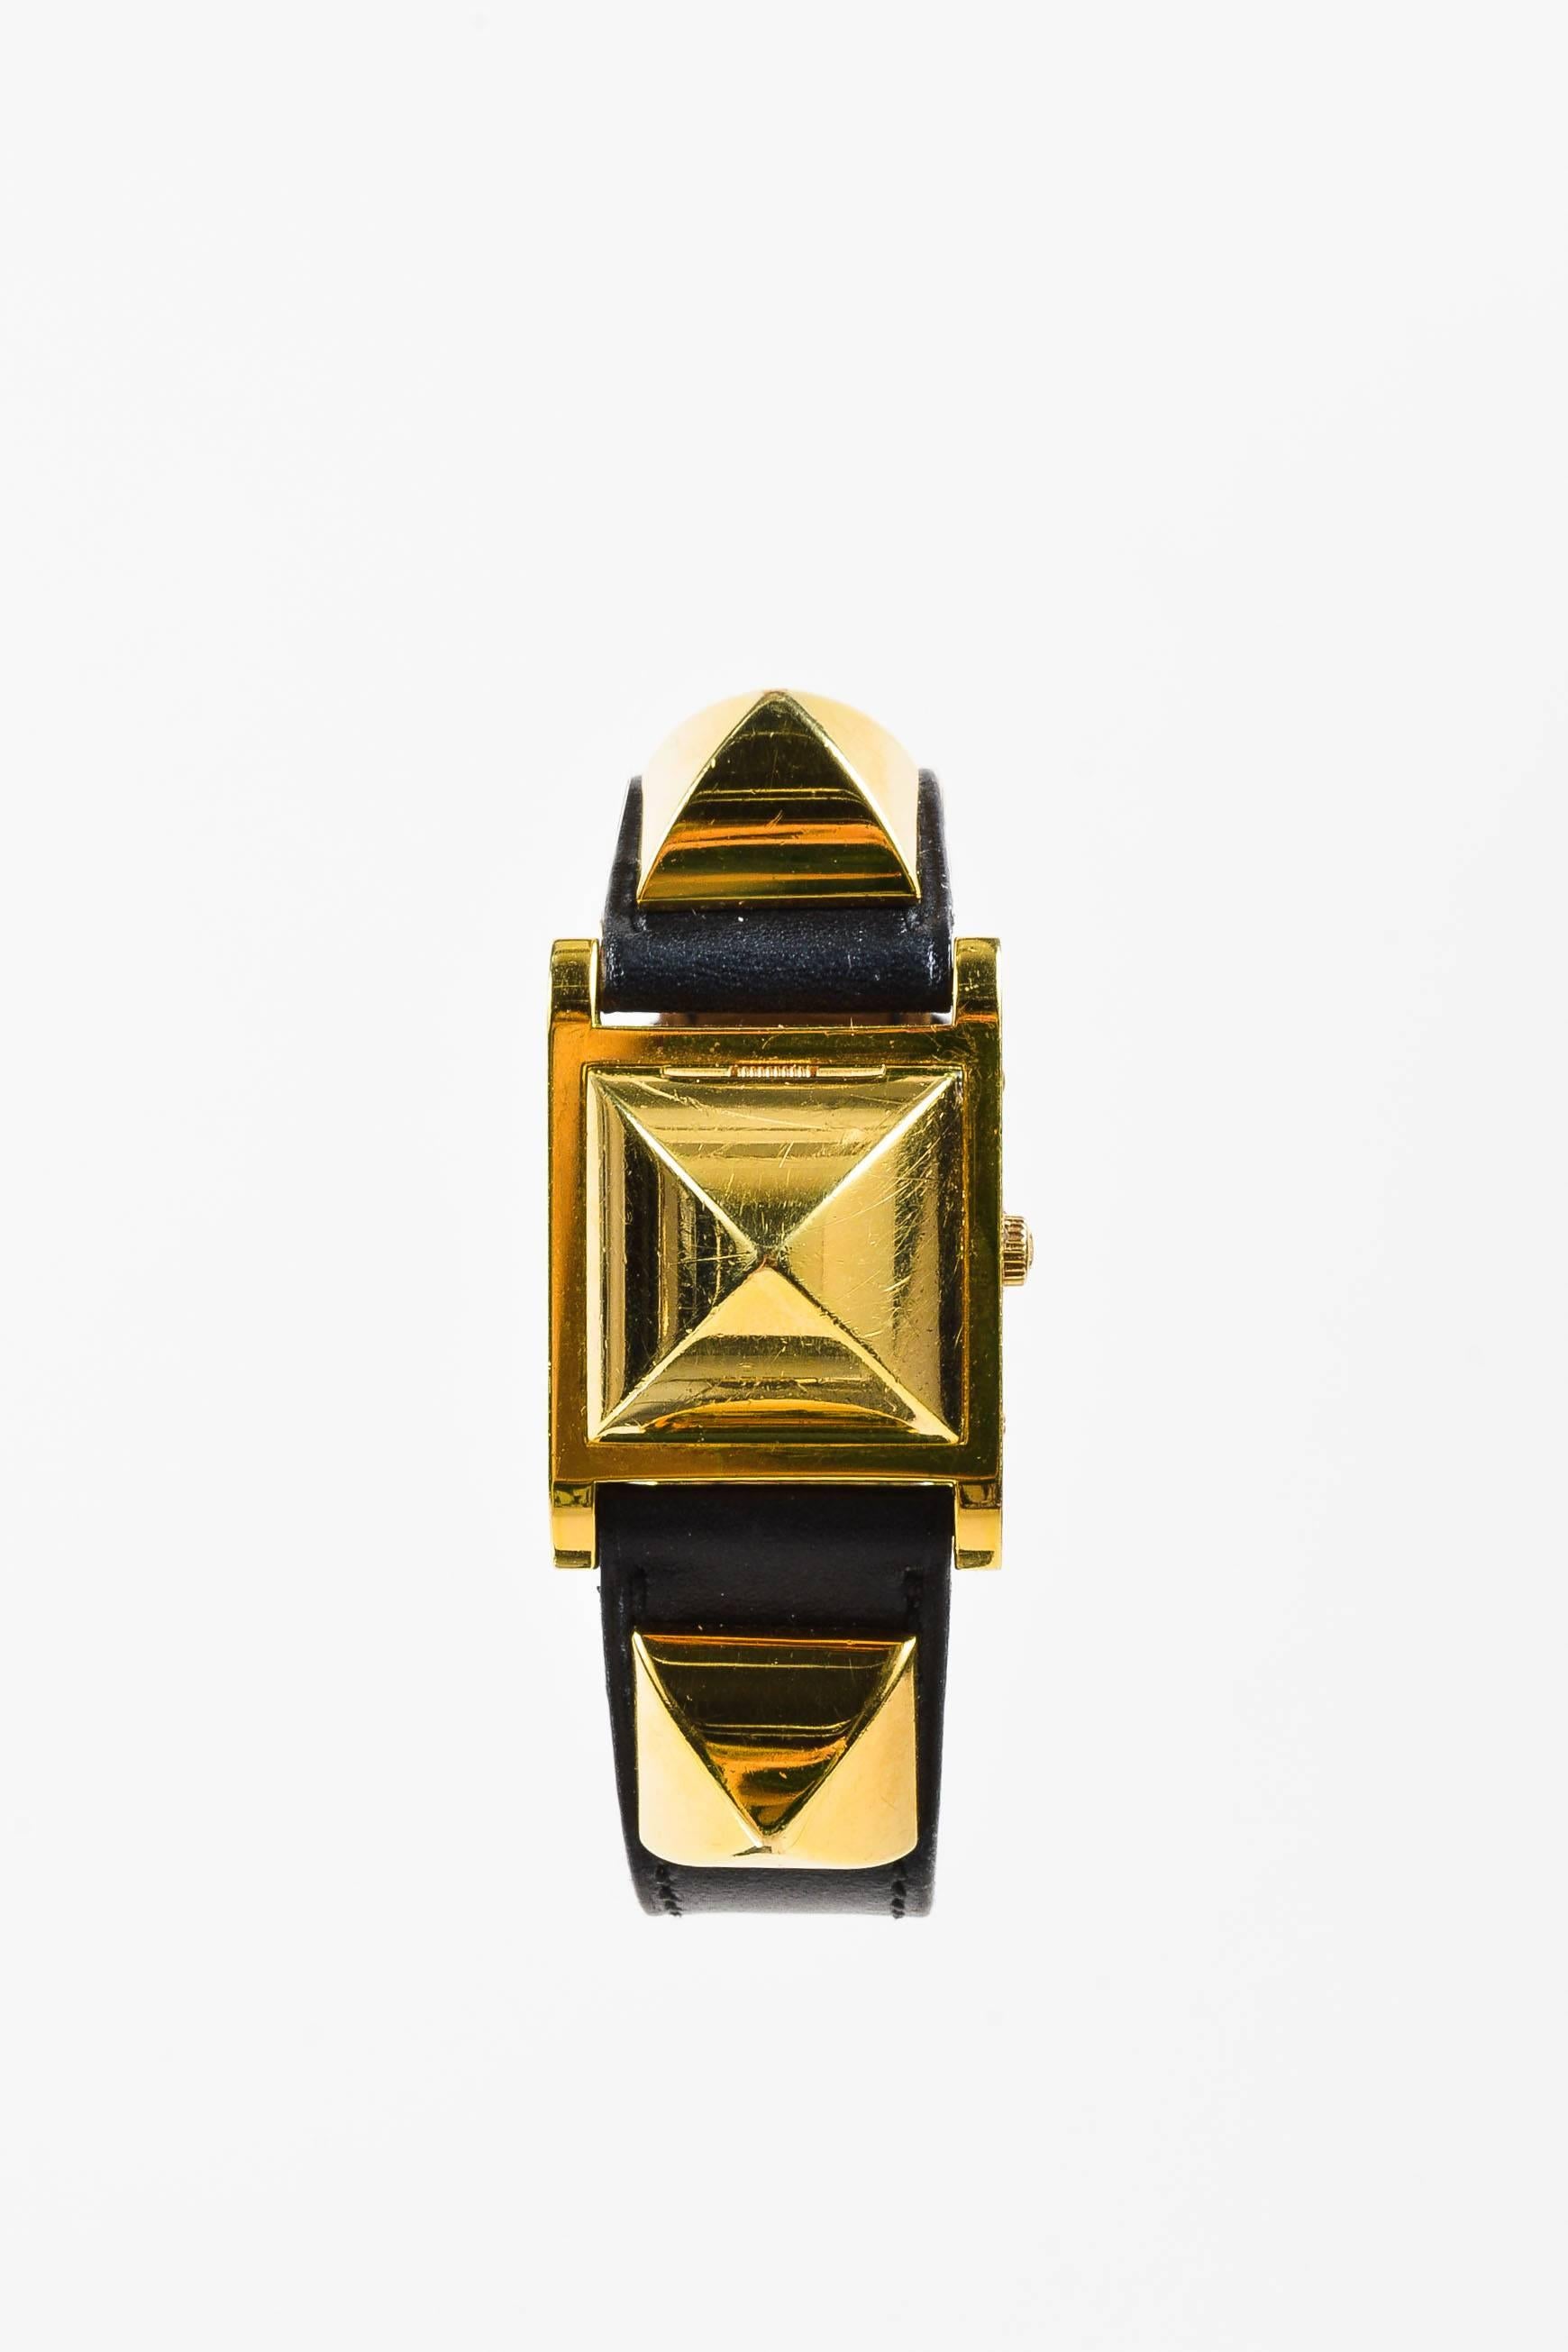 Circa 1995, this unique vintage Hermes watch features a black leather band and gold plated steel construction. The center spiked pyramid lifts up to reveal the watch face with dots at 12, 3, 6, and 9 with two gold-tone hands. Buckle